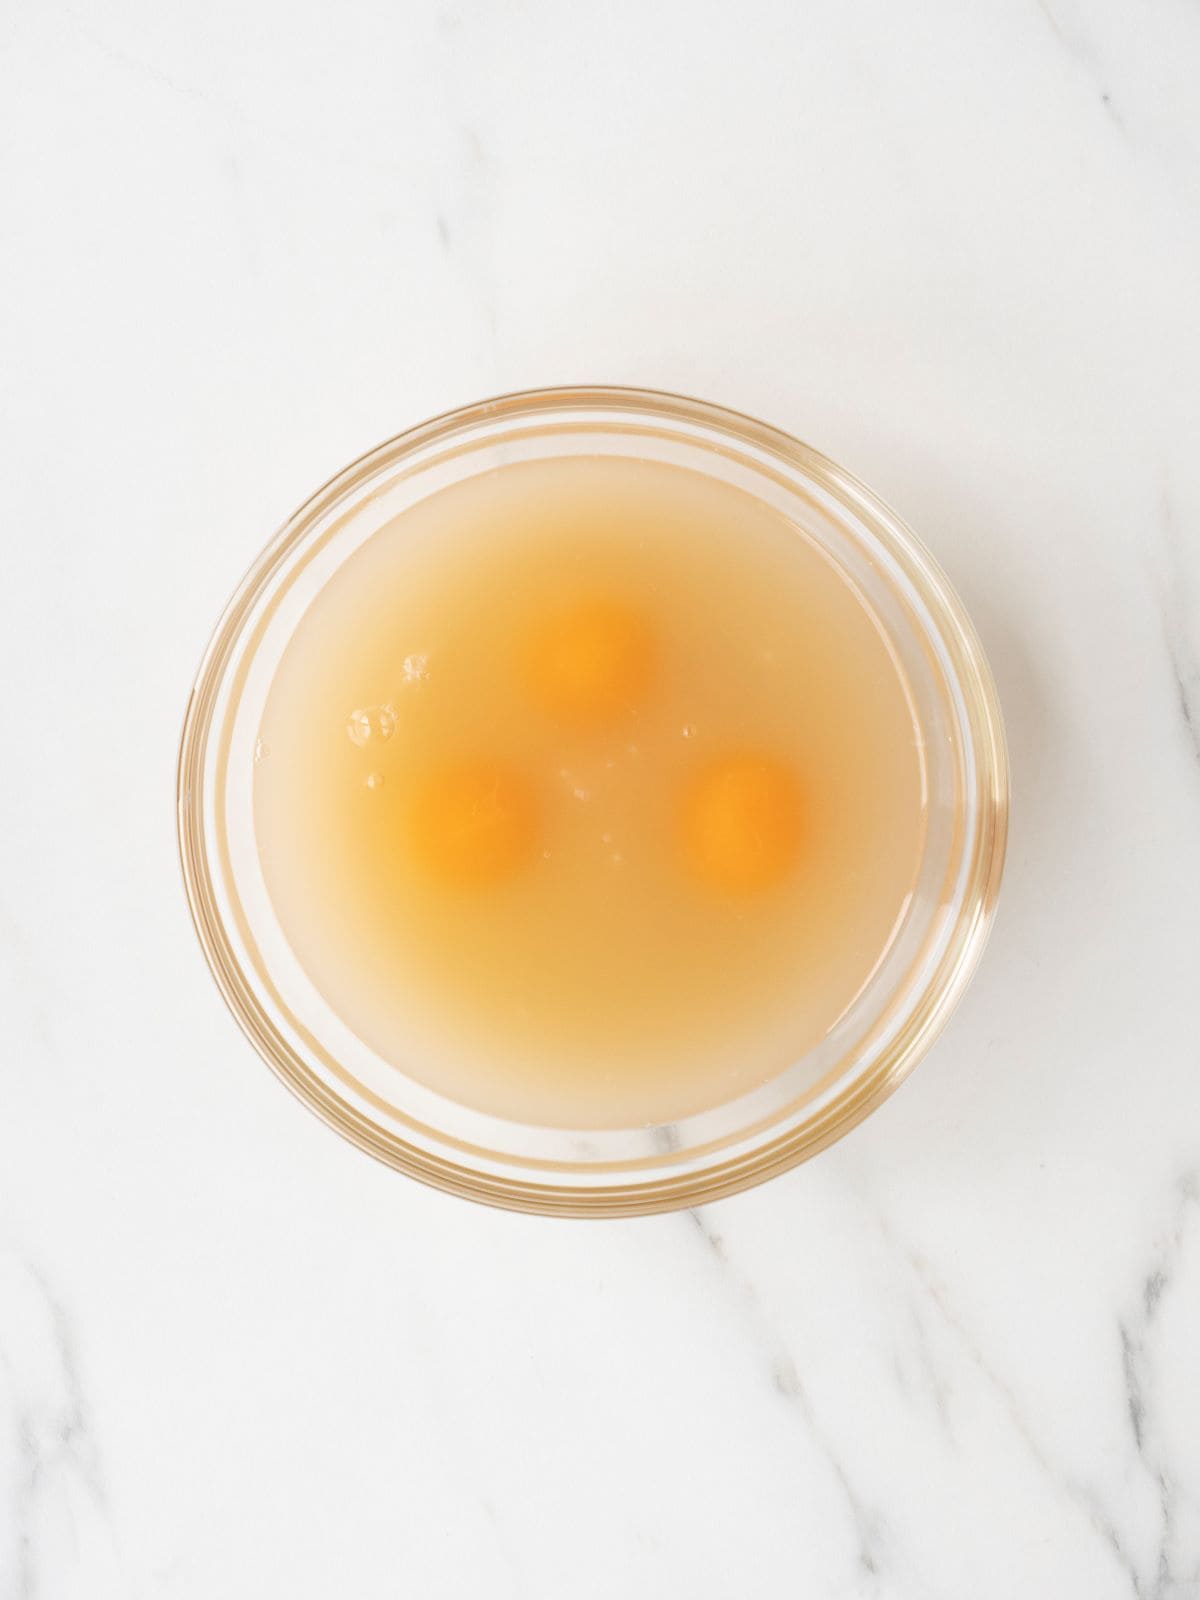 A small glass mixing bowl with eggs and chicken broth.